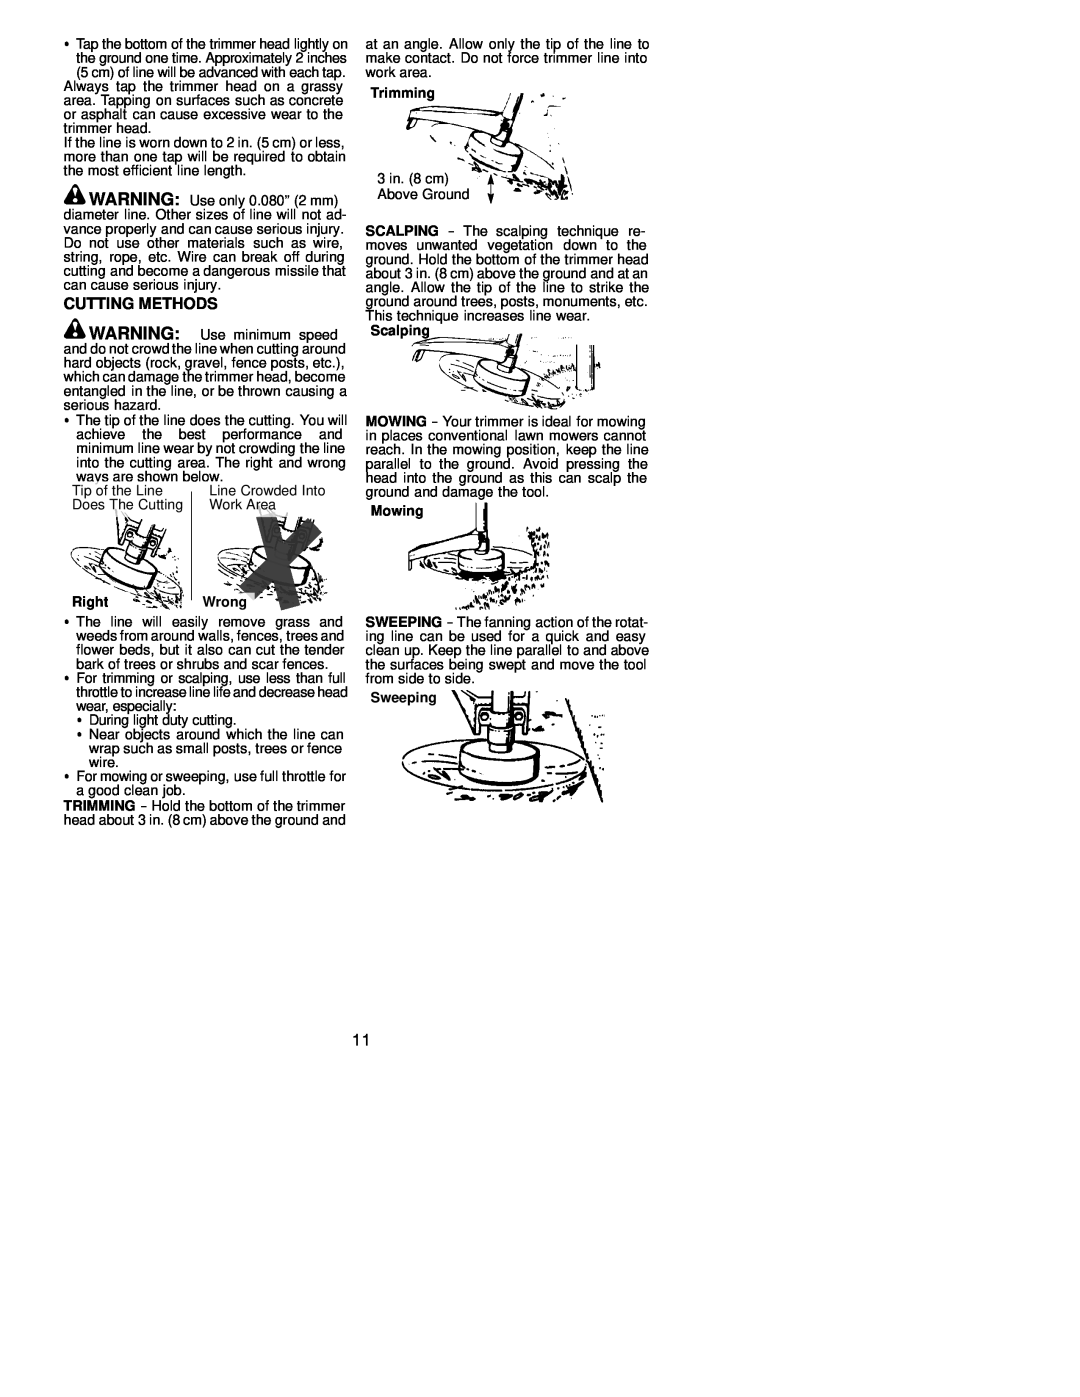 Poulan 530163731 instruction manual Cutting Methods, RightWrong, Trimming, Scalping, Mowing, Sweeping 